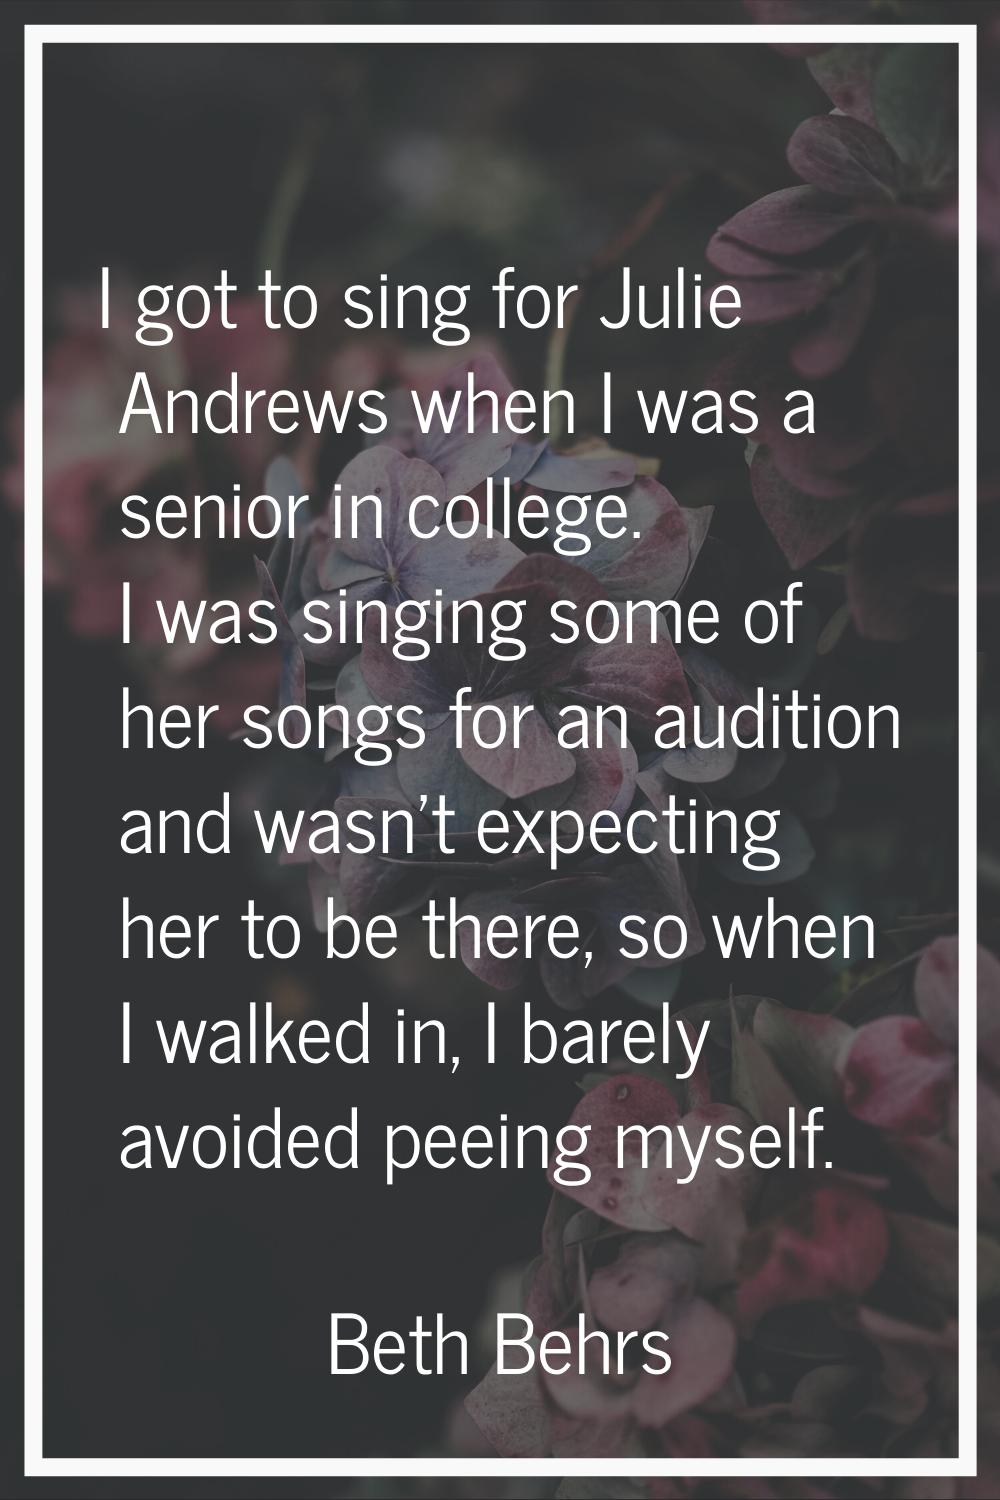 I got to sing for Julie Andrews when I was a senior in college. I was singing some of her songs for